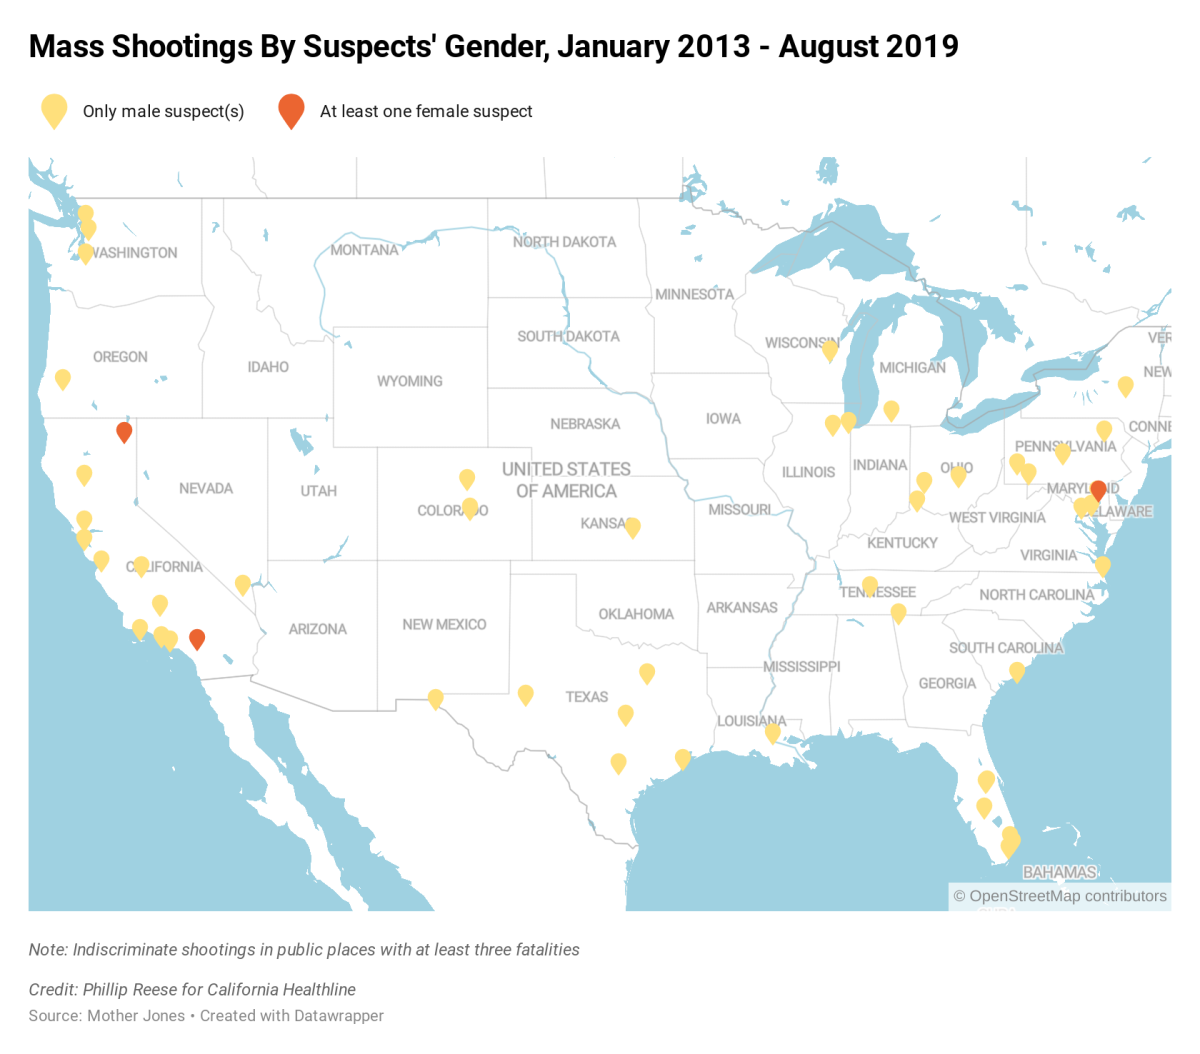 Mass shooting suspects, by gender